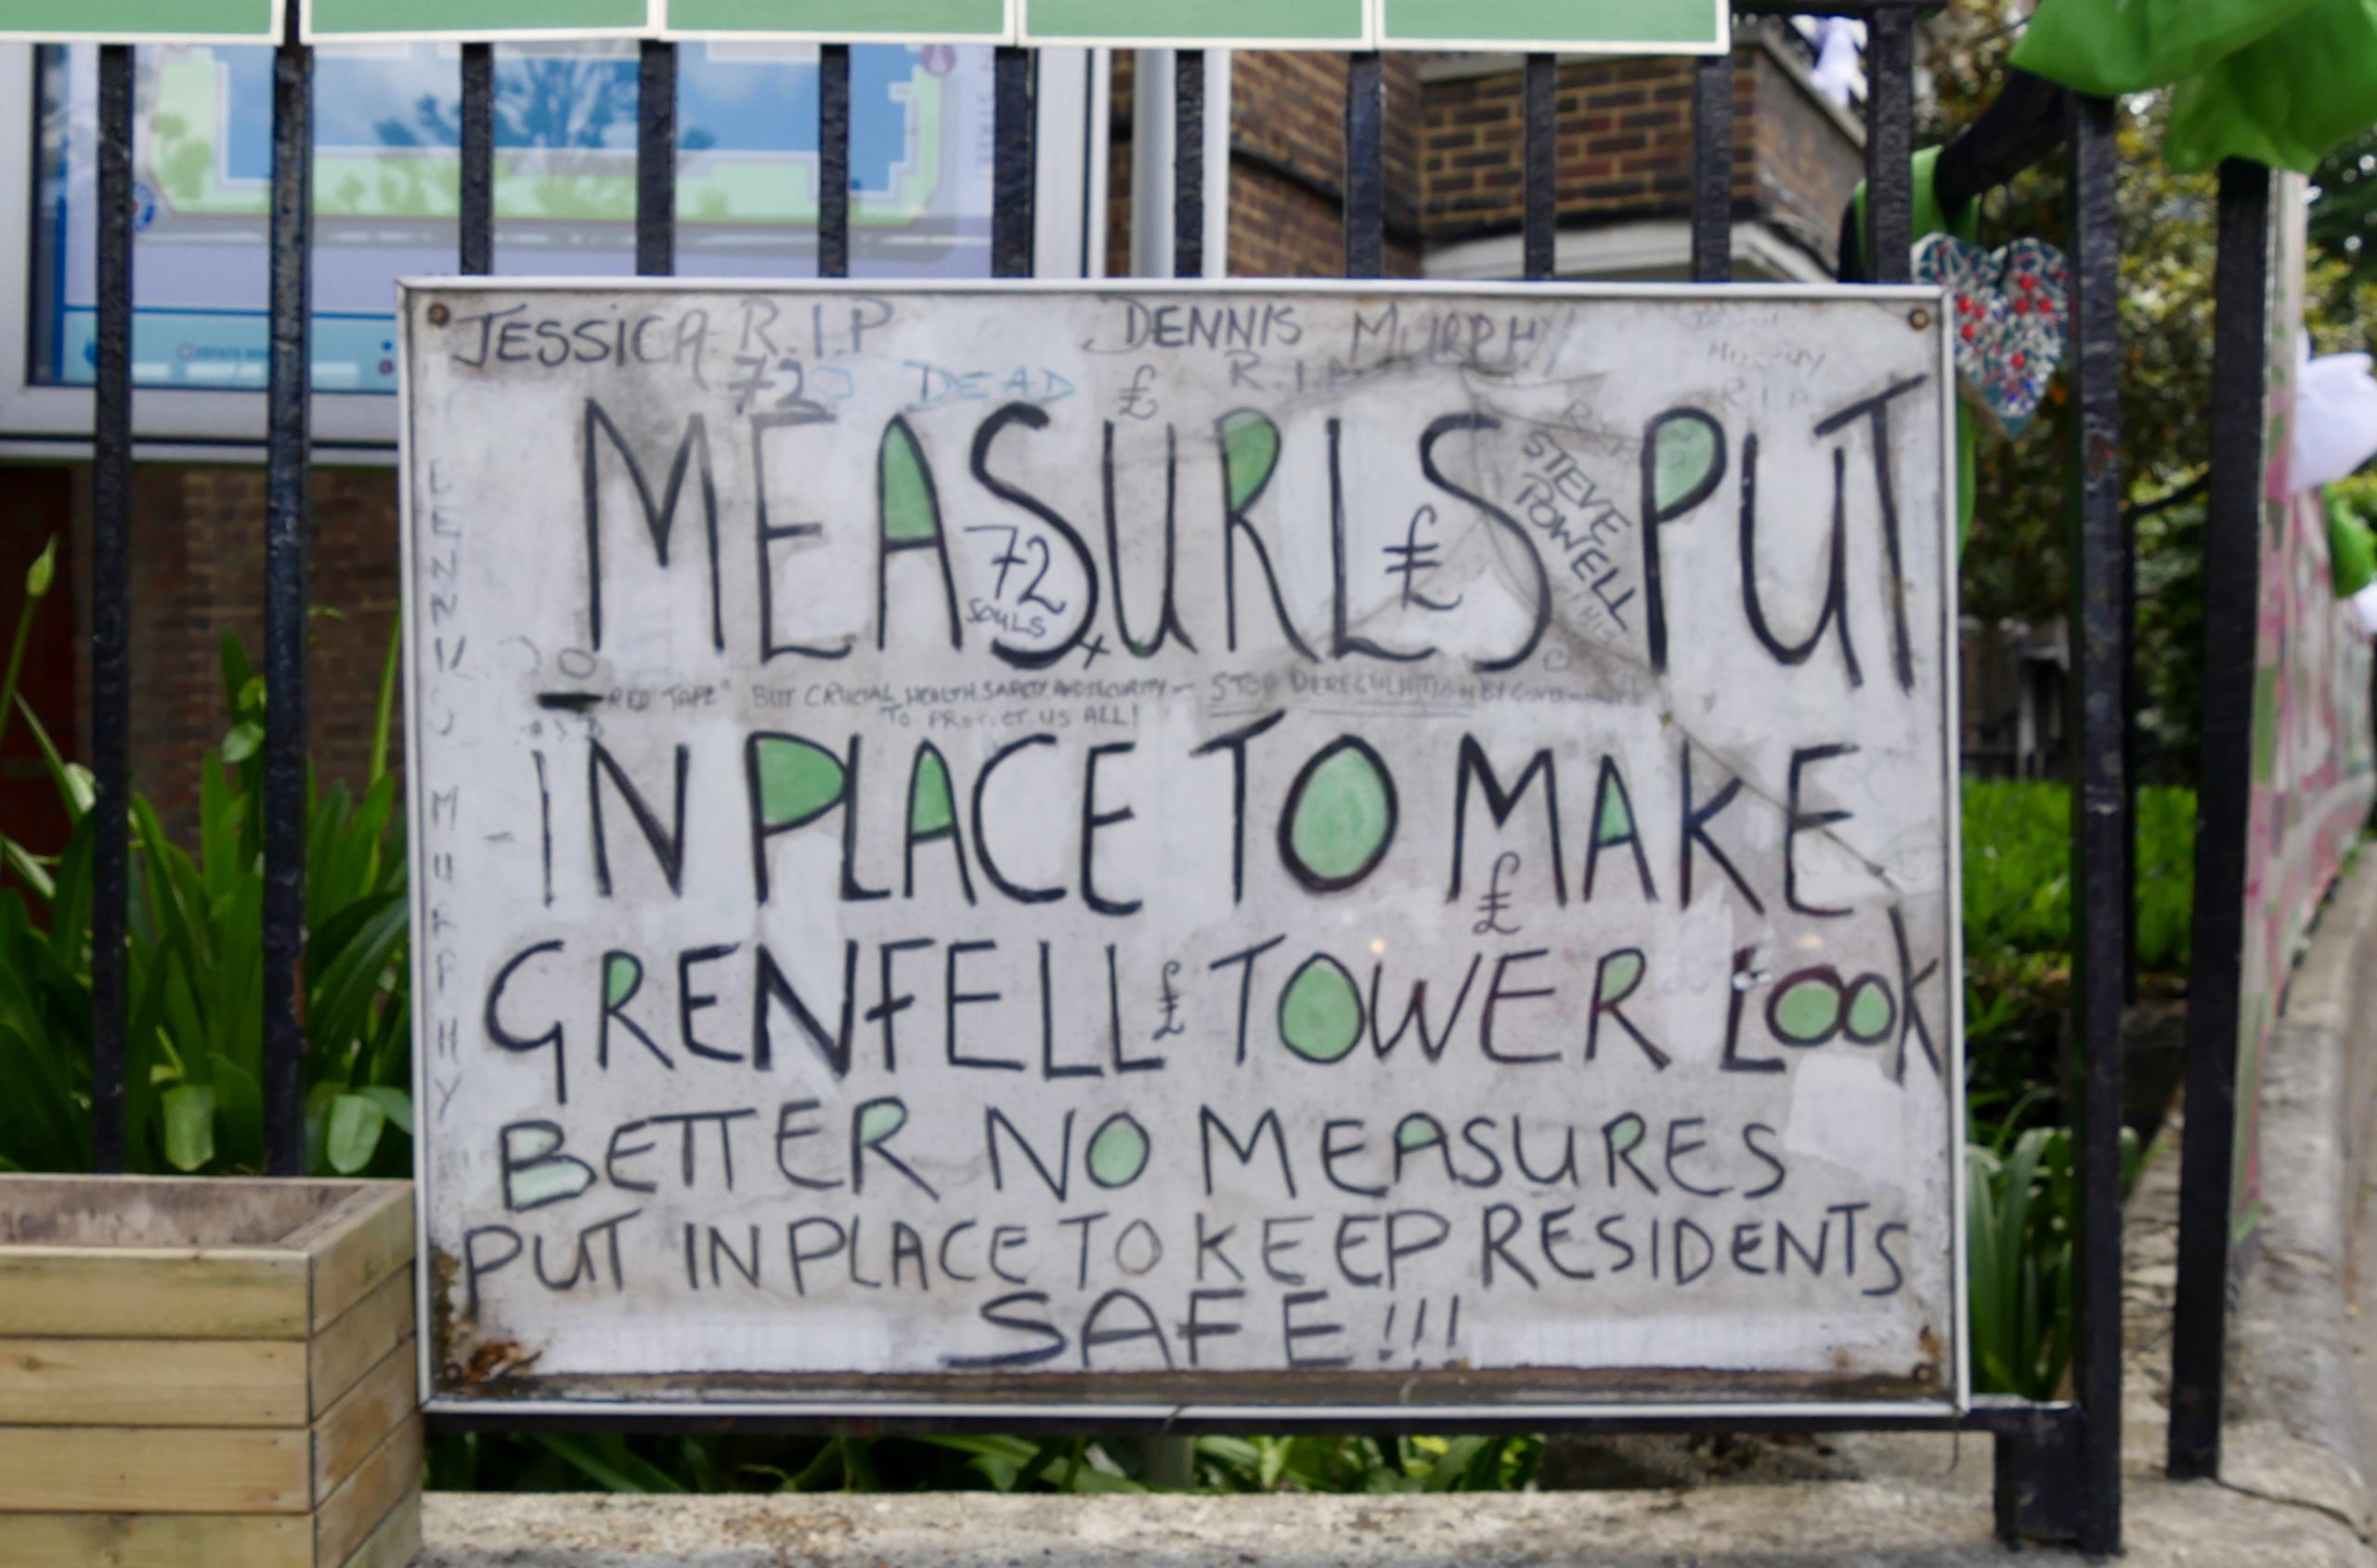 "Measurements put in place to make Grenfell Tower look better, no measurements put in place to keep residents safe" 